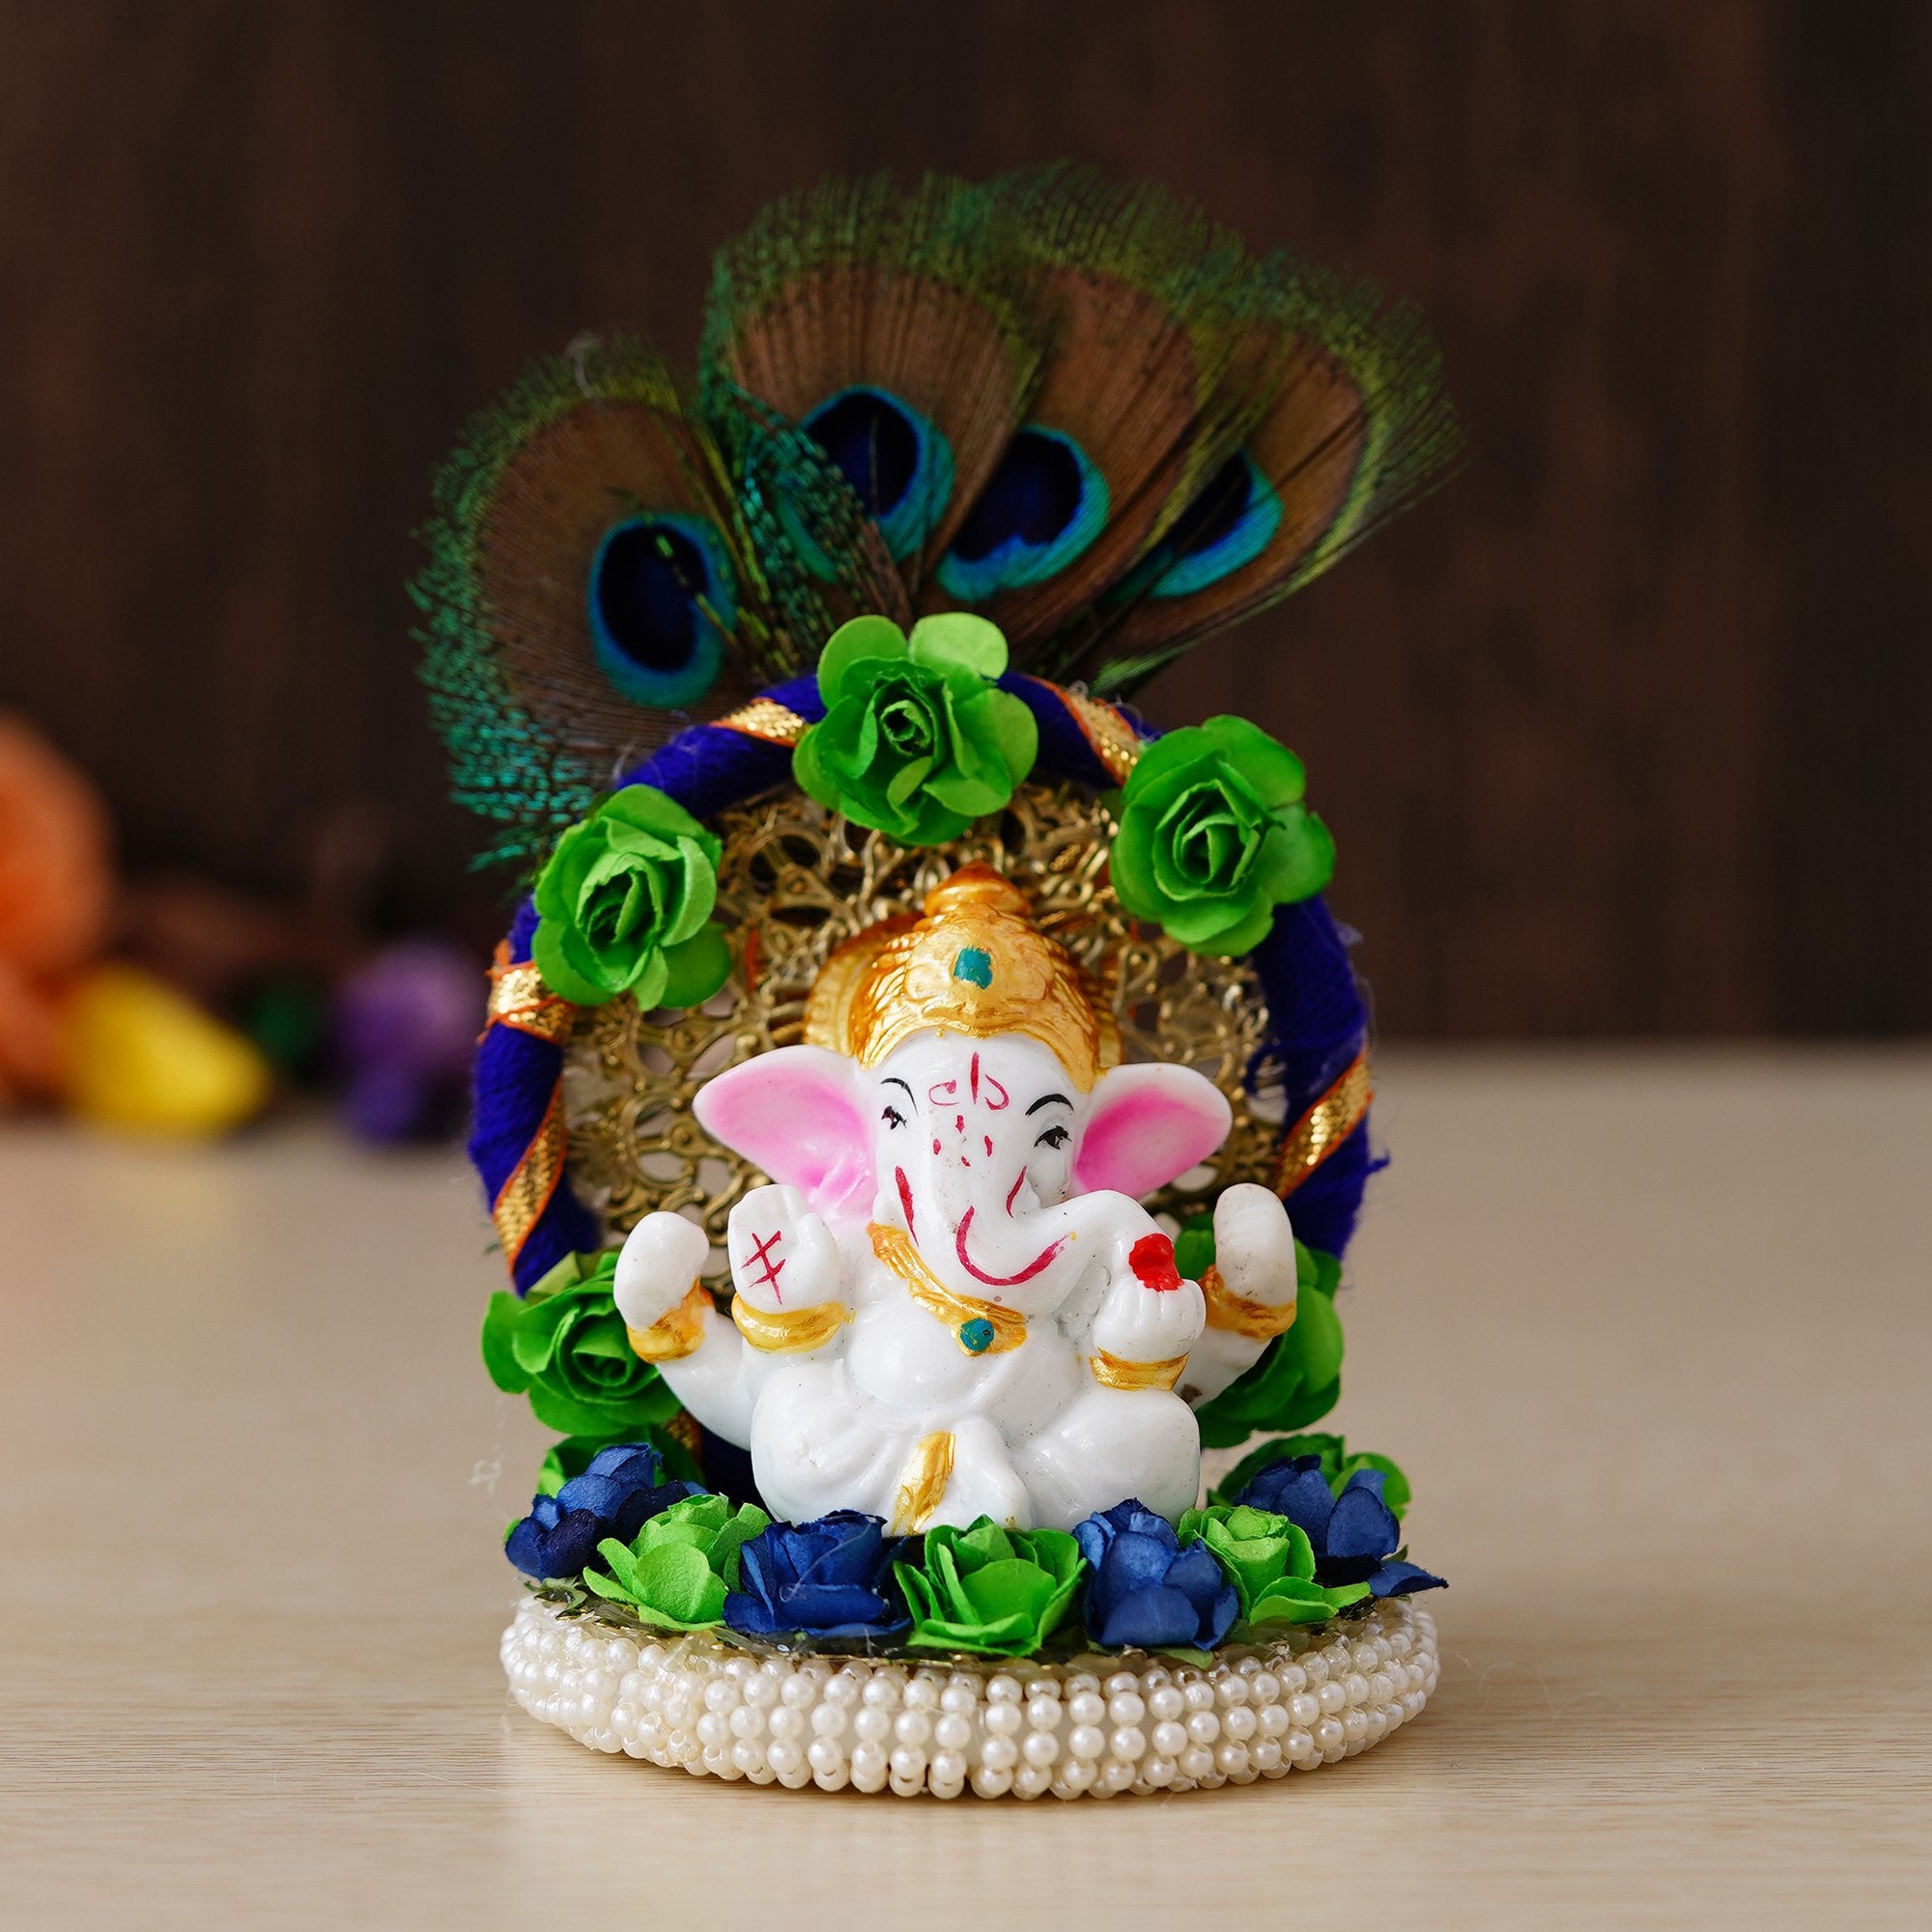 Polyresin Lord Ganesha Idol on Handcrafted Peacock Feather Floral Plate for Home and Car Dashboard